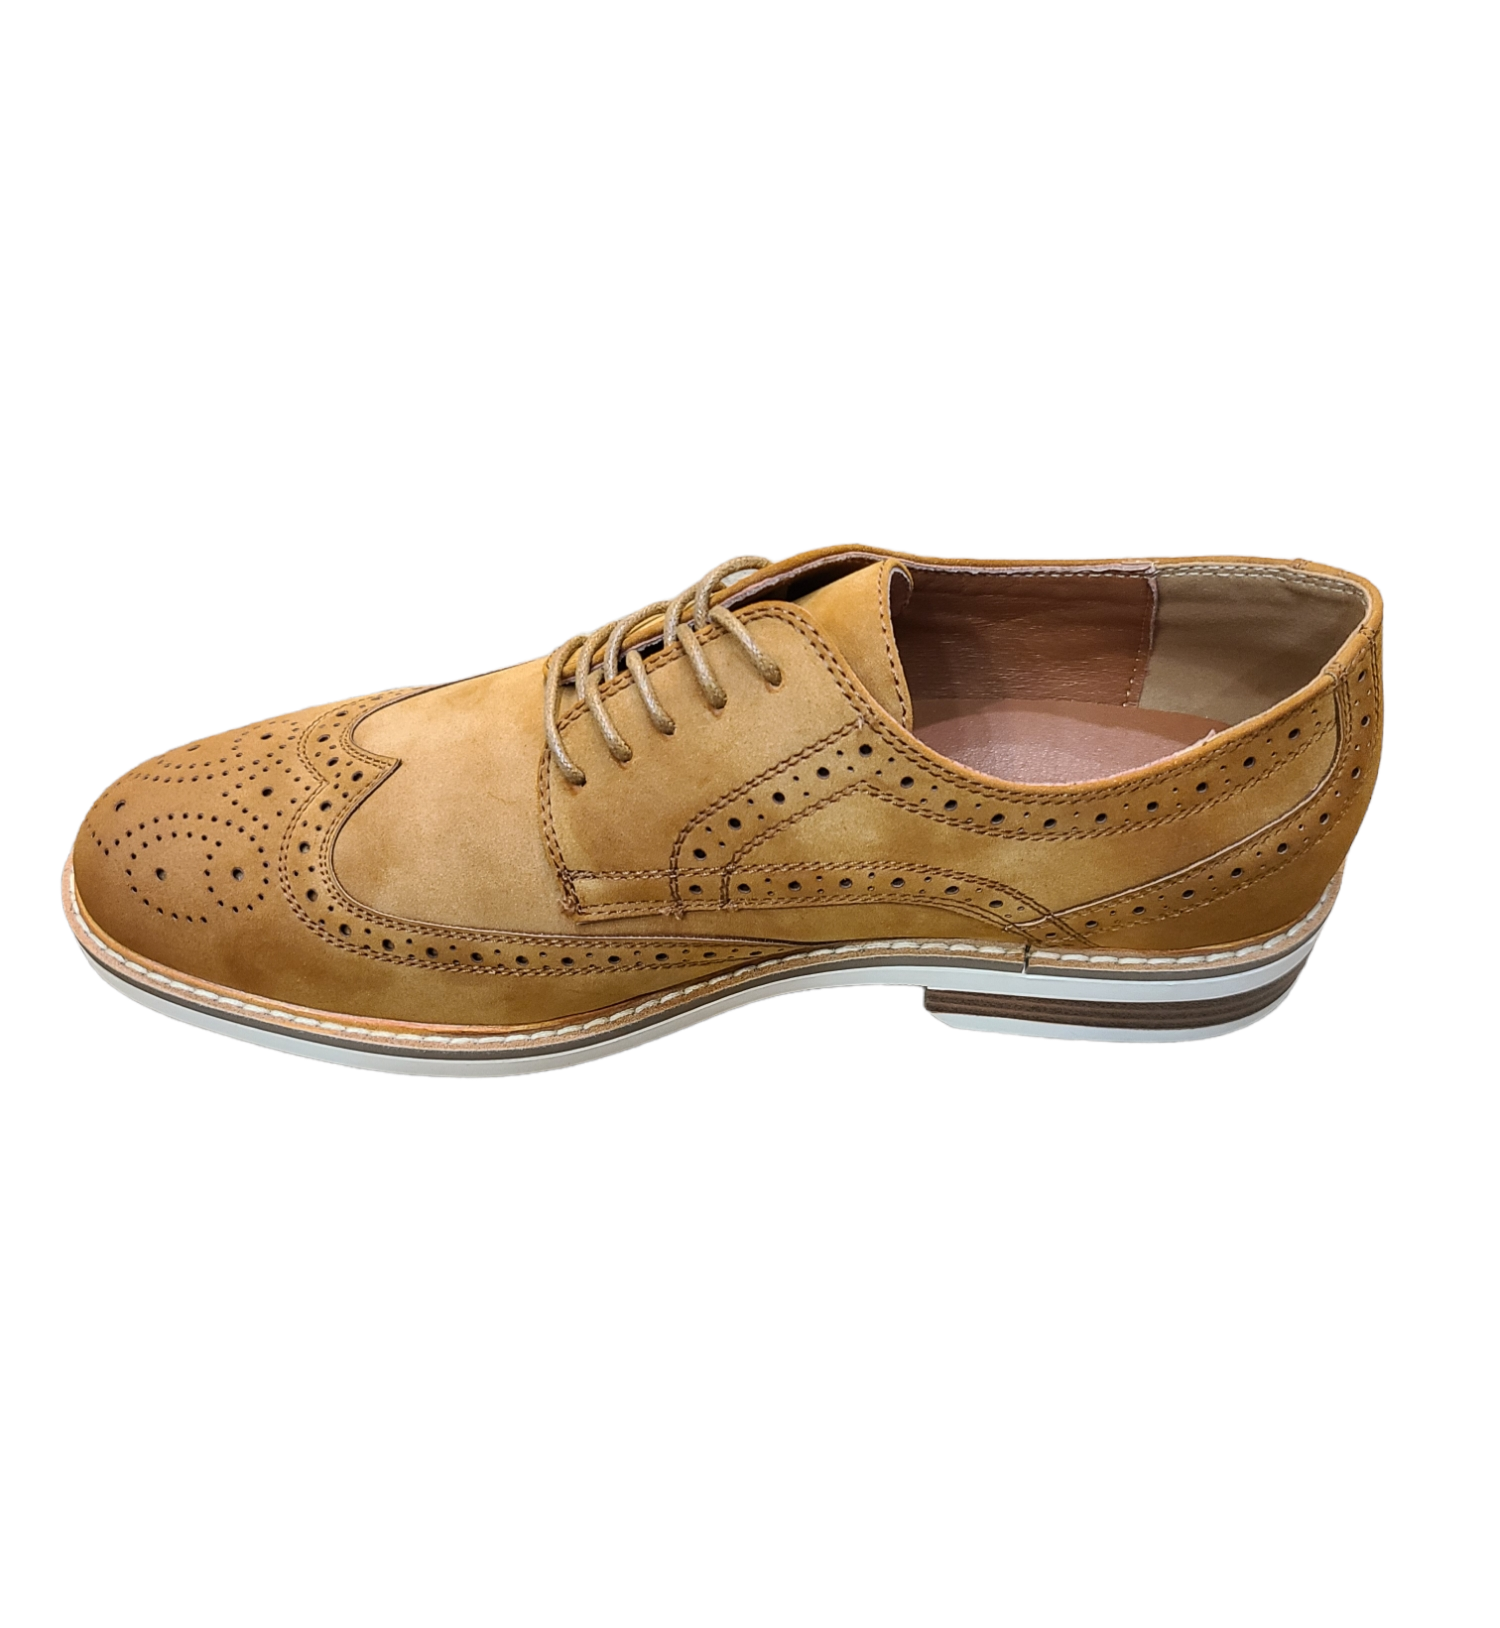 St Patrick Wing Tip Shoes